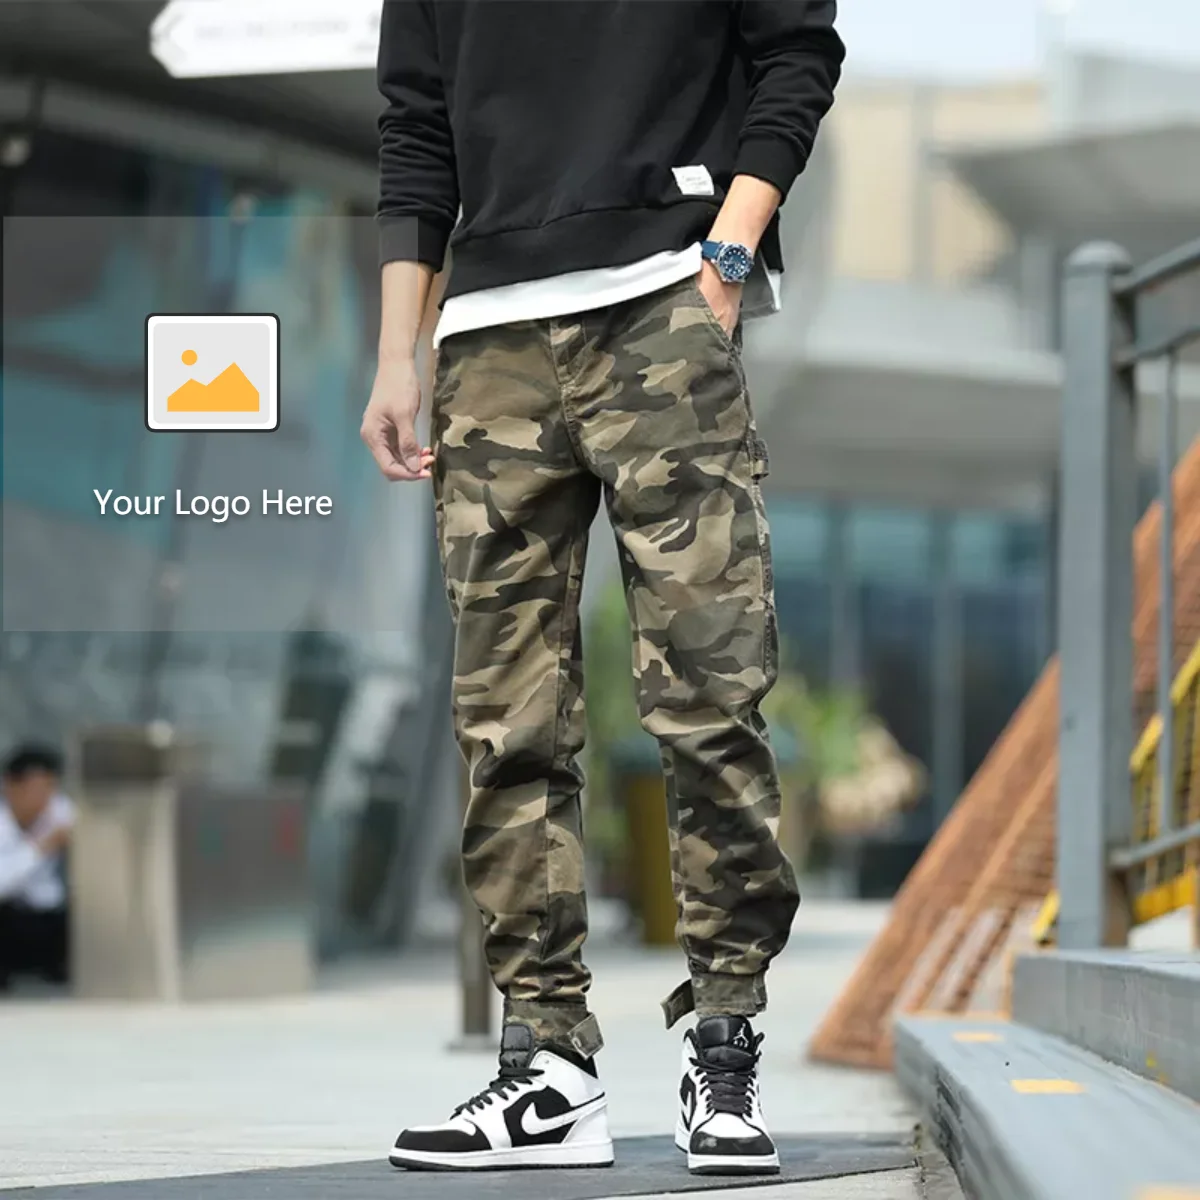 Spring Style Men Fashion Cargo Pants Multi-pockets Cotton Mens Camouflage  Printed Pants - Buy Camouflage Printed Pants,Cargo Pants Mens Camouflage,Camouflage  Pants Product on 